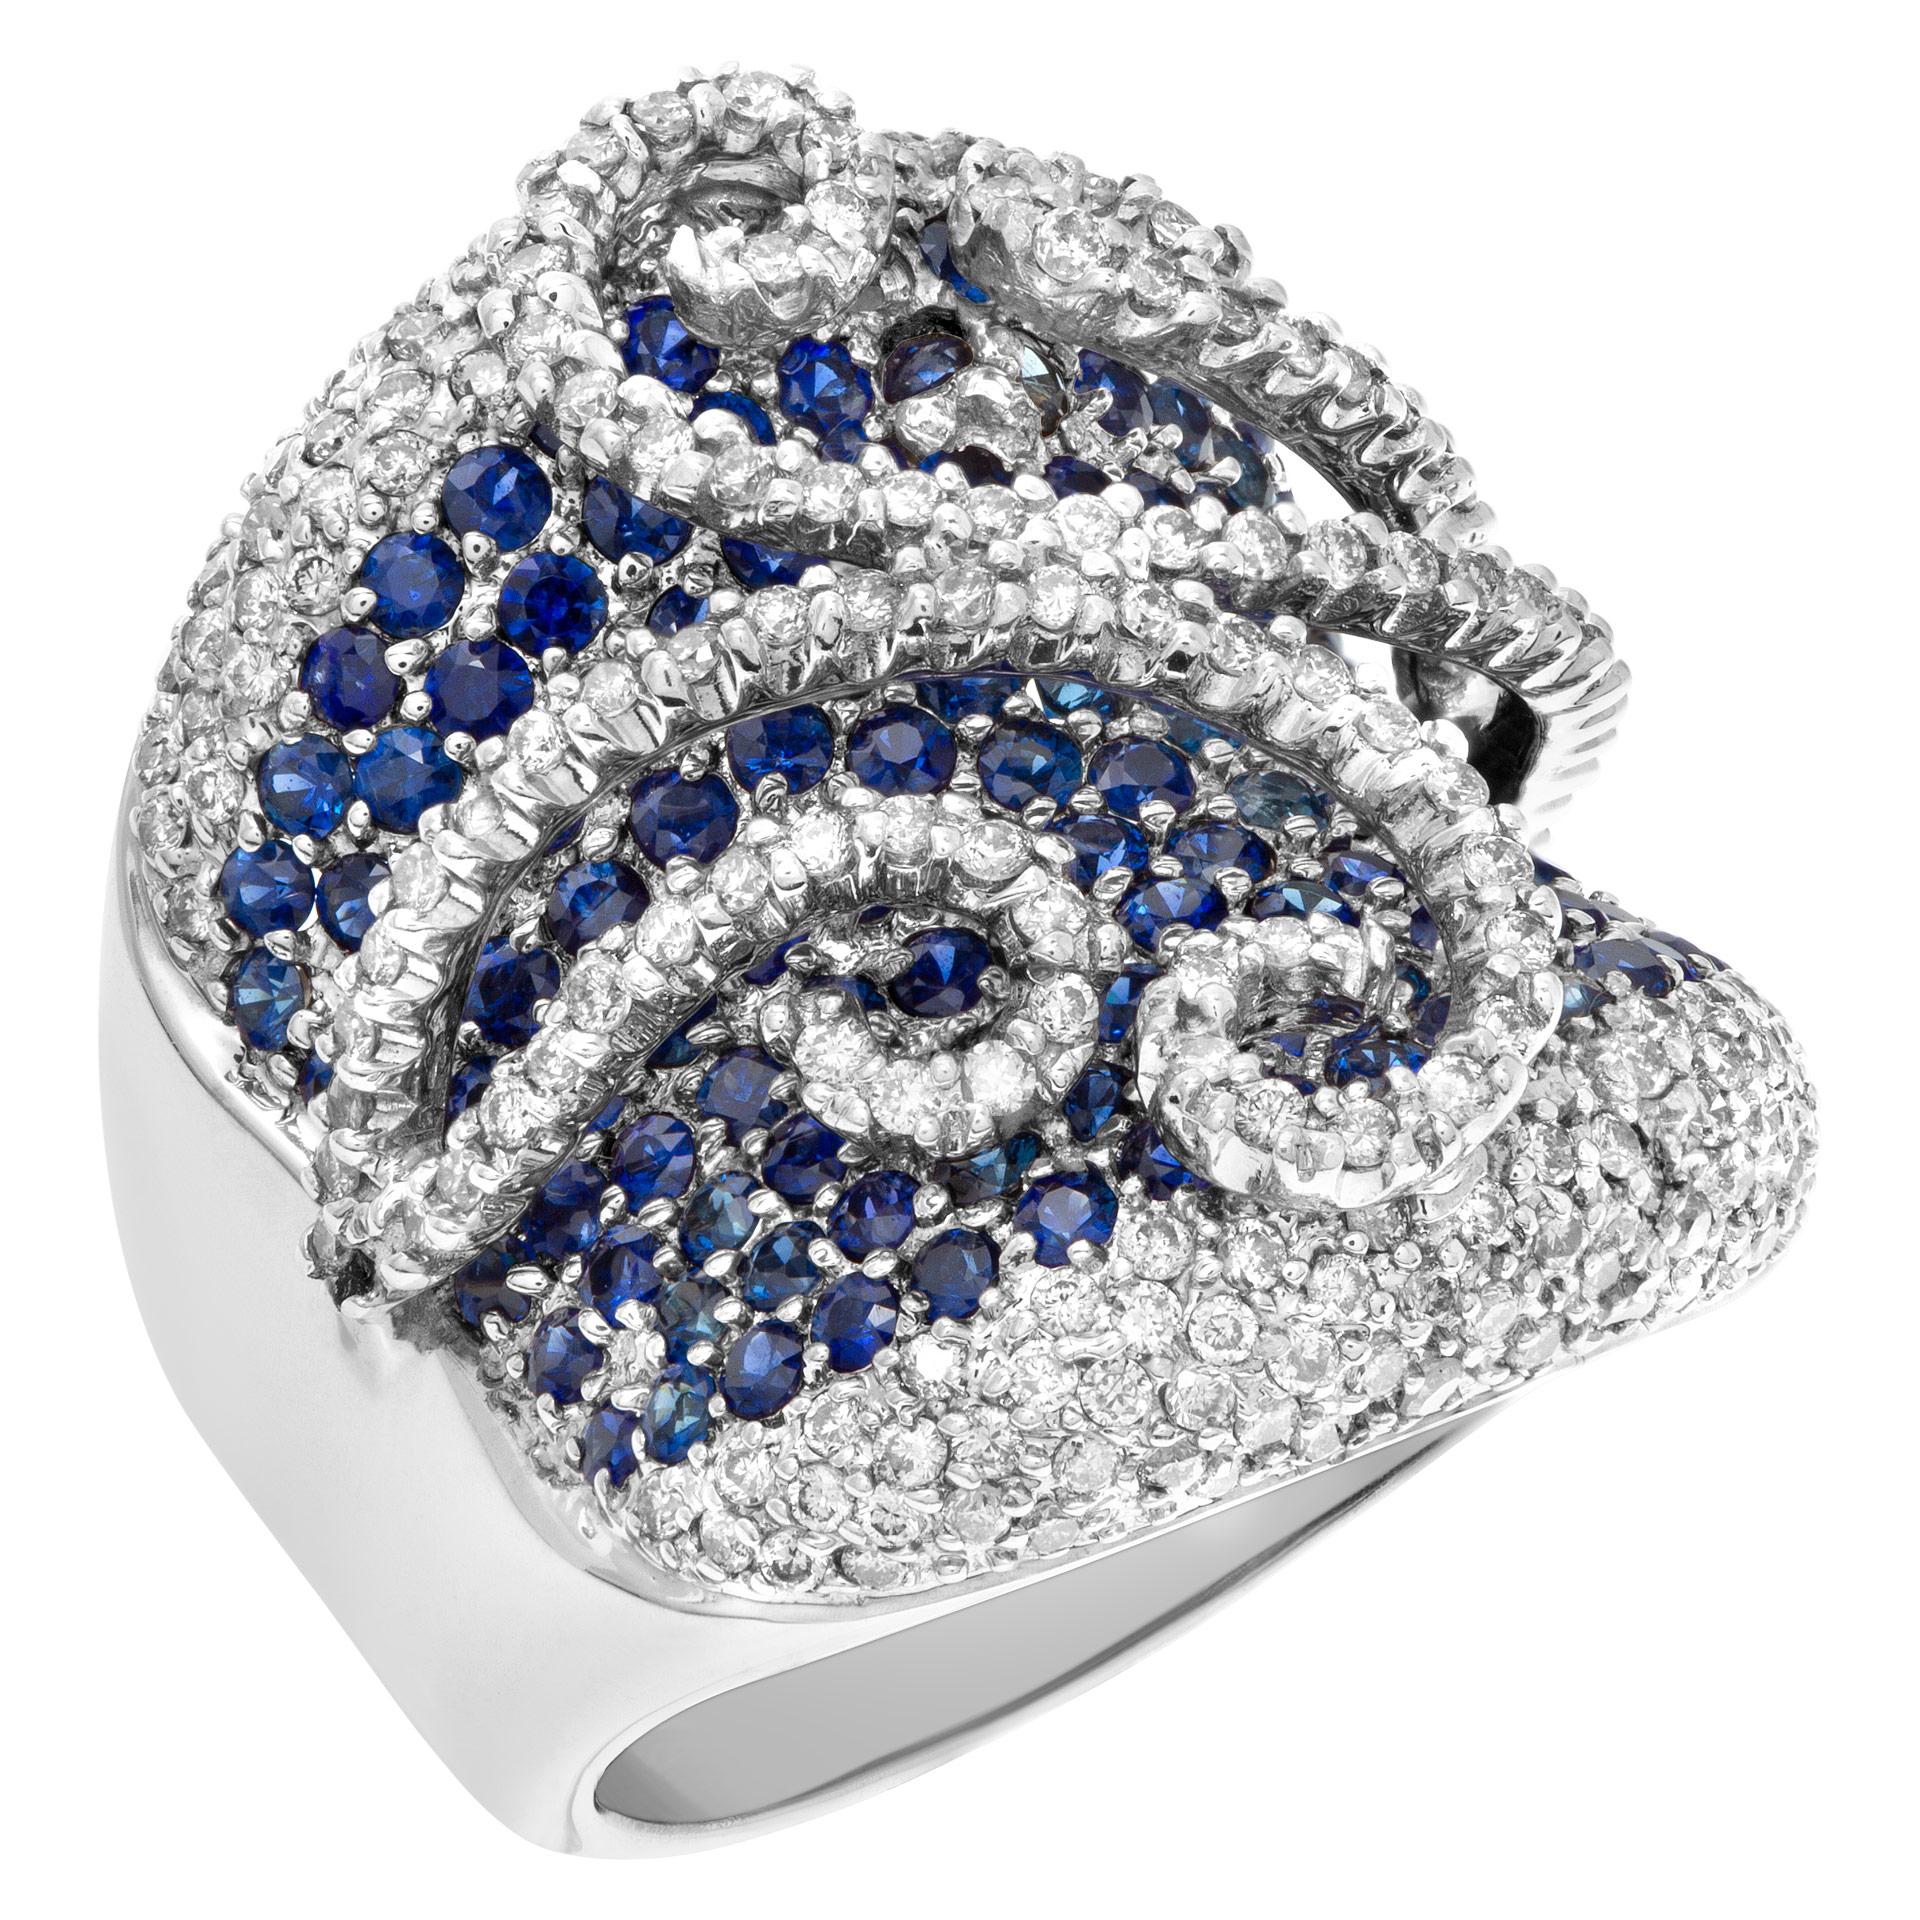 Swirls and more! Ring with approximately 1 carat in diamonds and 1 carat in blue sapphires all set in 18k white gold. Shank width on the top 24mm, back 7.4mm. Size 4.75.  This Diamond ring is currently size 4.75 and some items can be sized up or